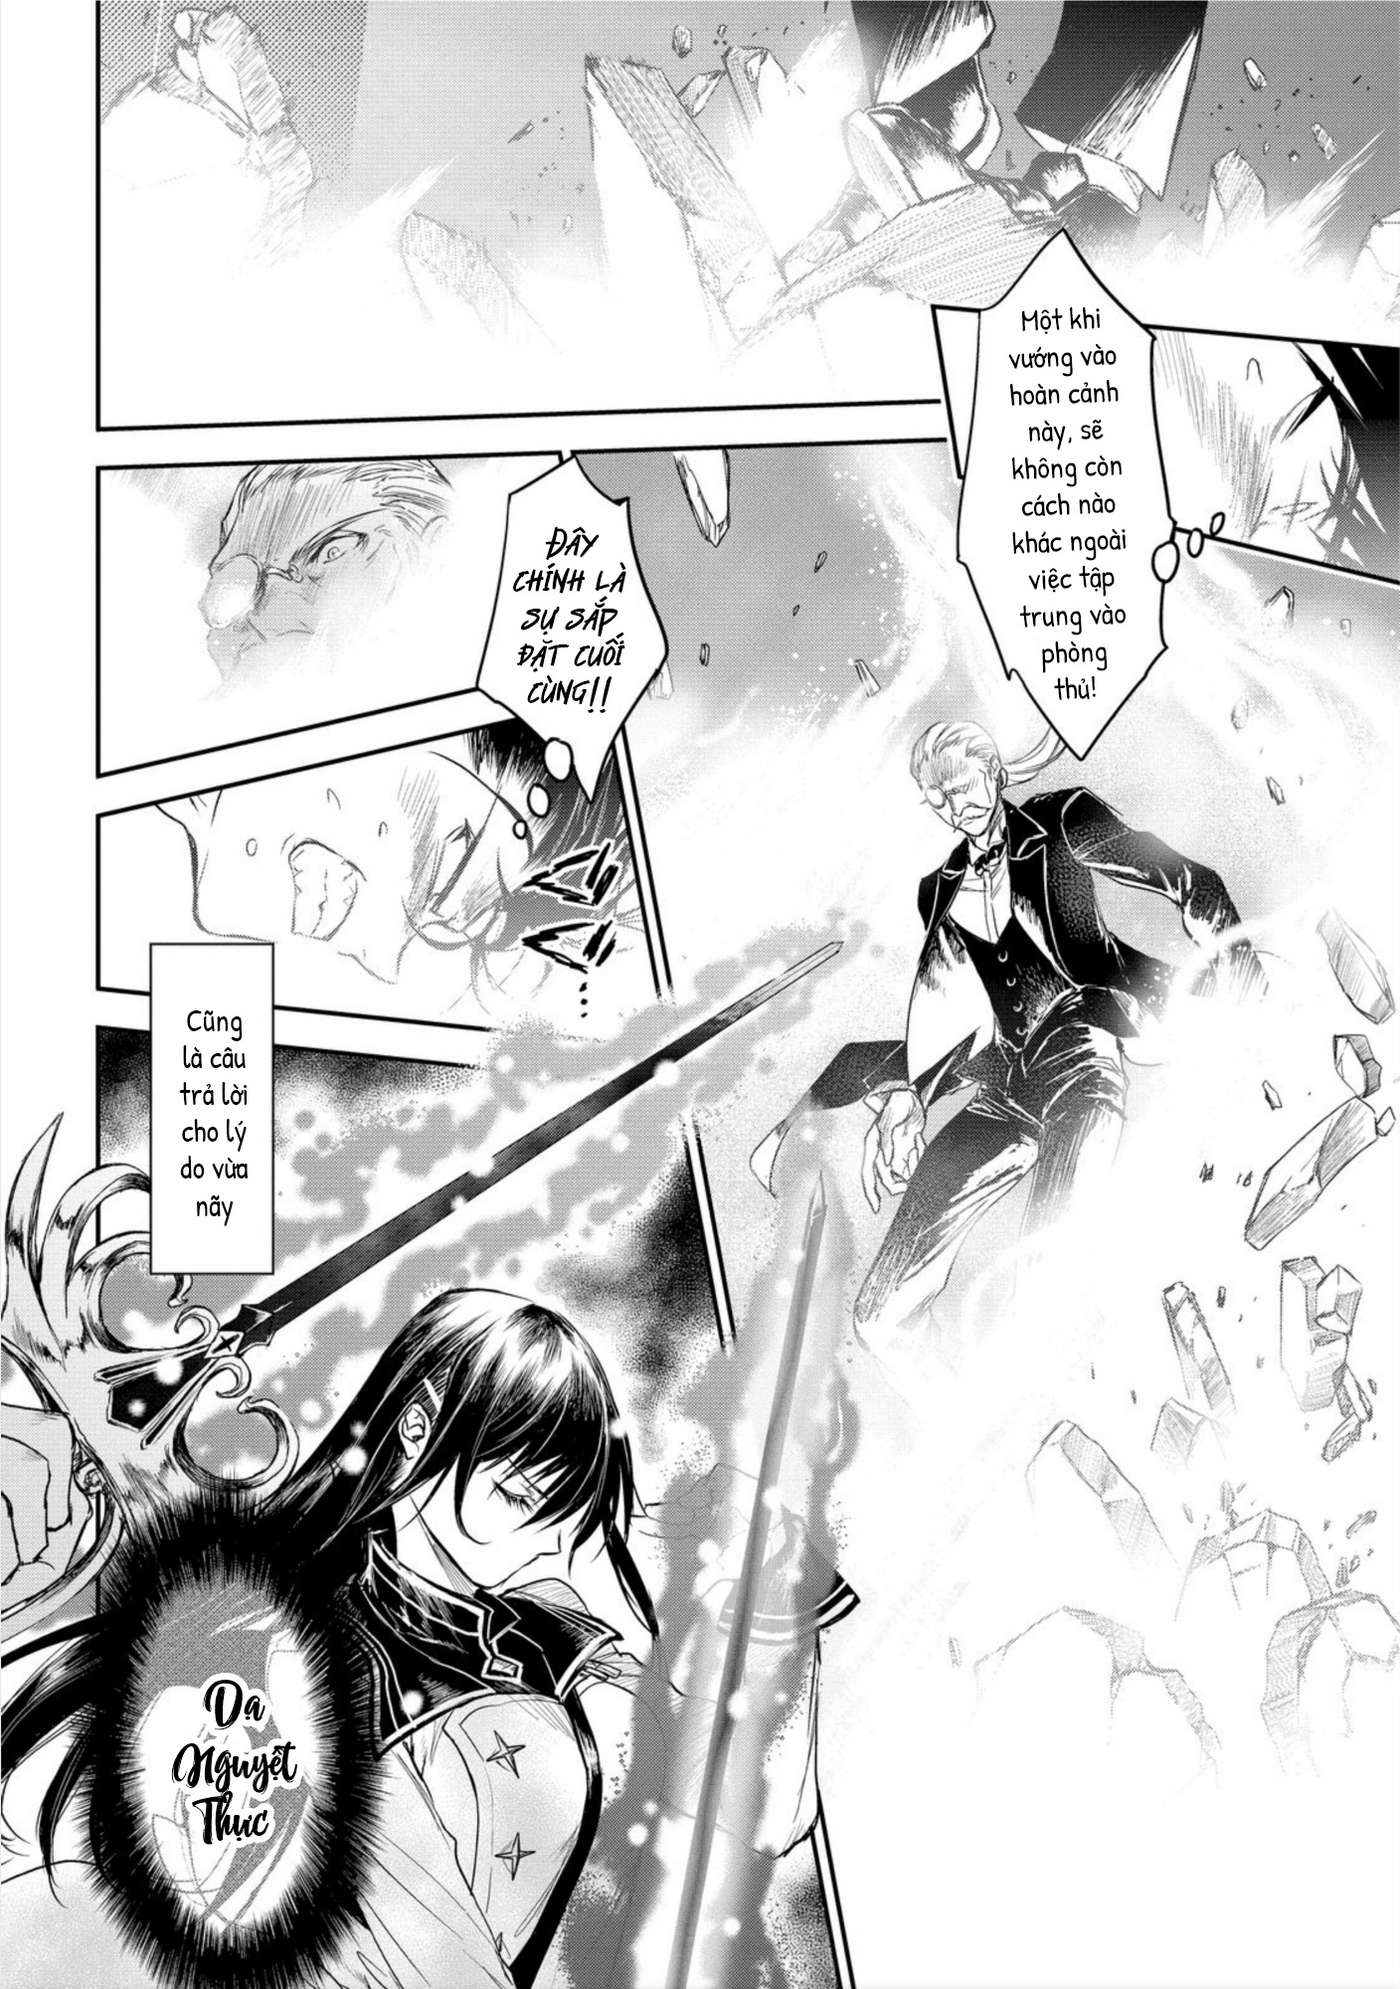 Ori Of The Dragon Chain - "Heart" In The Mind (Update Chap 19) Chapter 19 - Trang 21